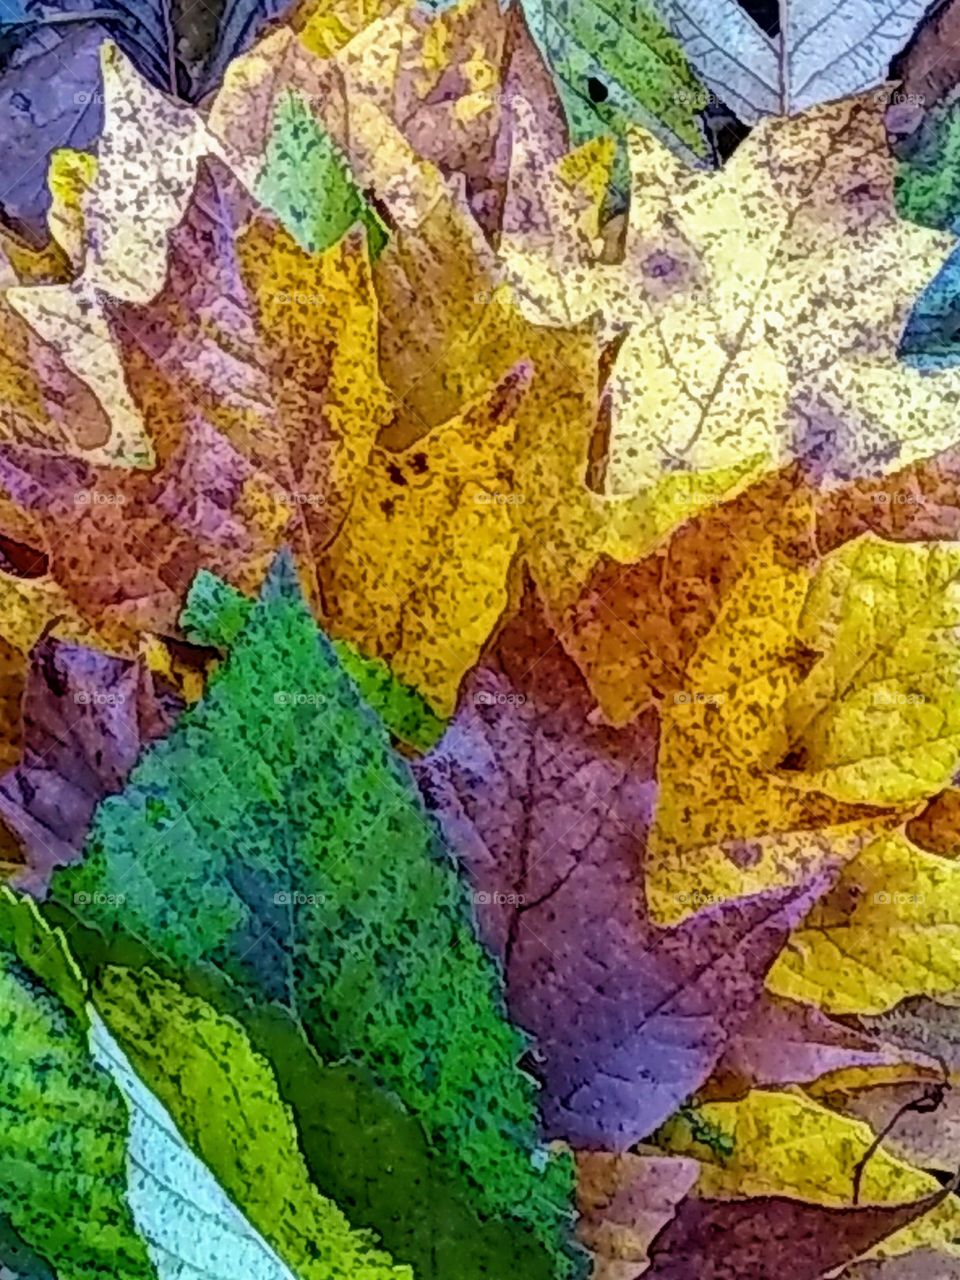 Colors of Fall